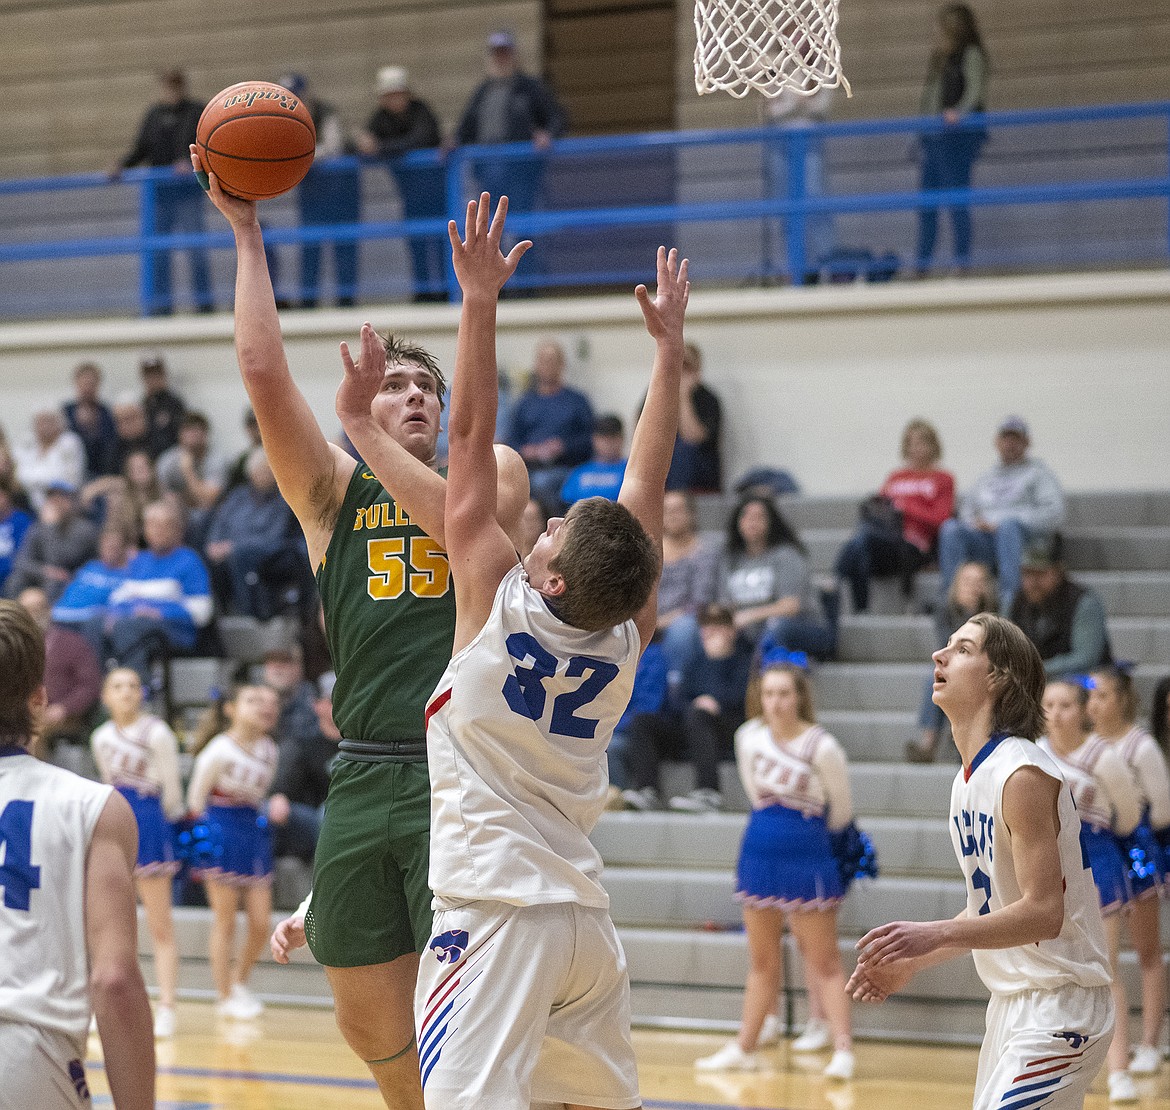 Whitefish senior Talon Holmquist drives to the hoop during a game against the Wildcats in Columbia Falls on Saturday. (Chris Peterson/Hungry Horse News)